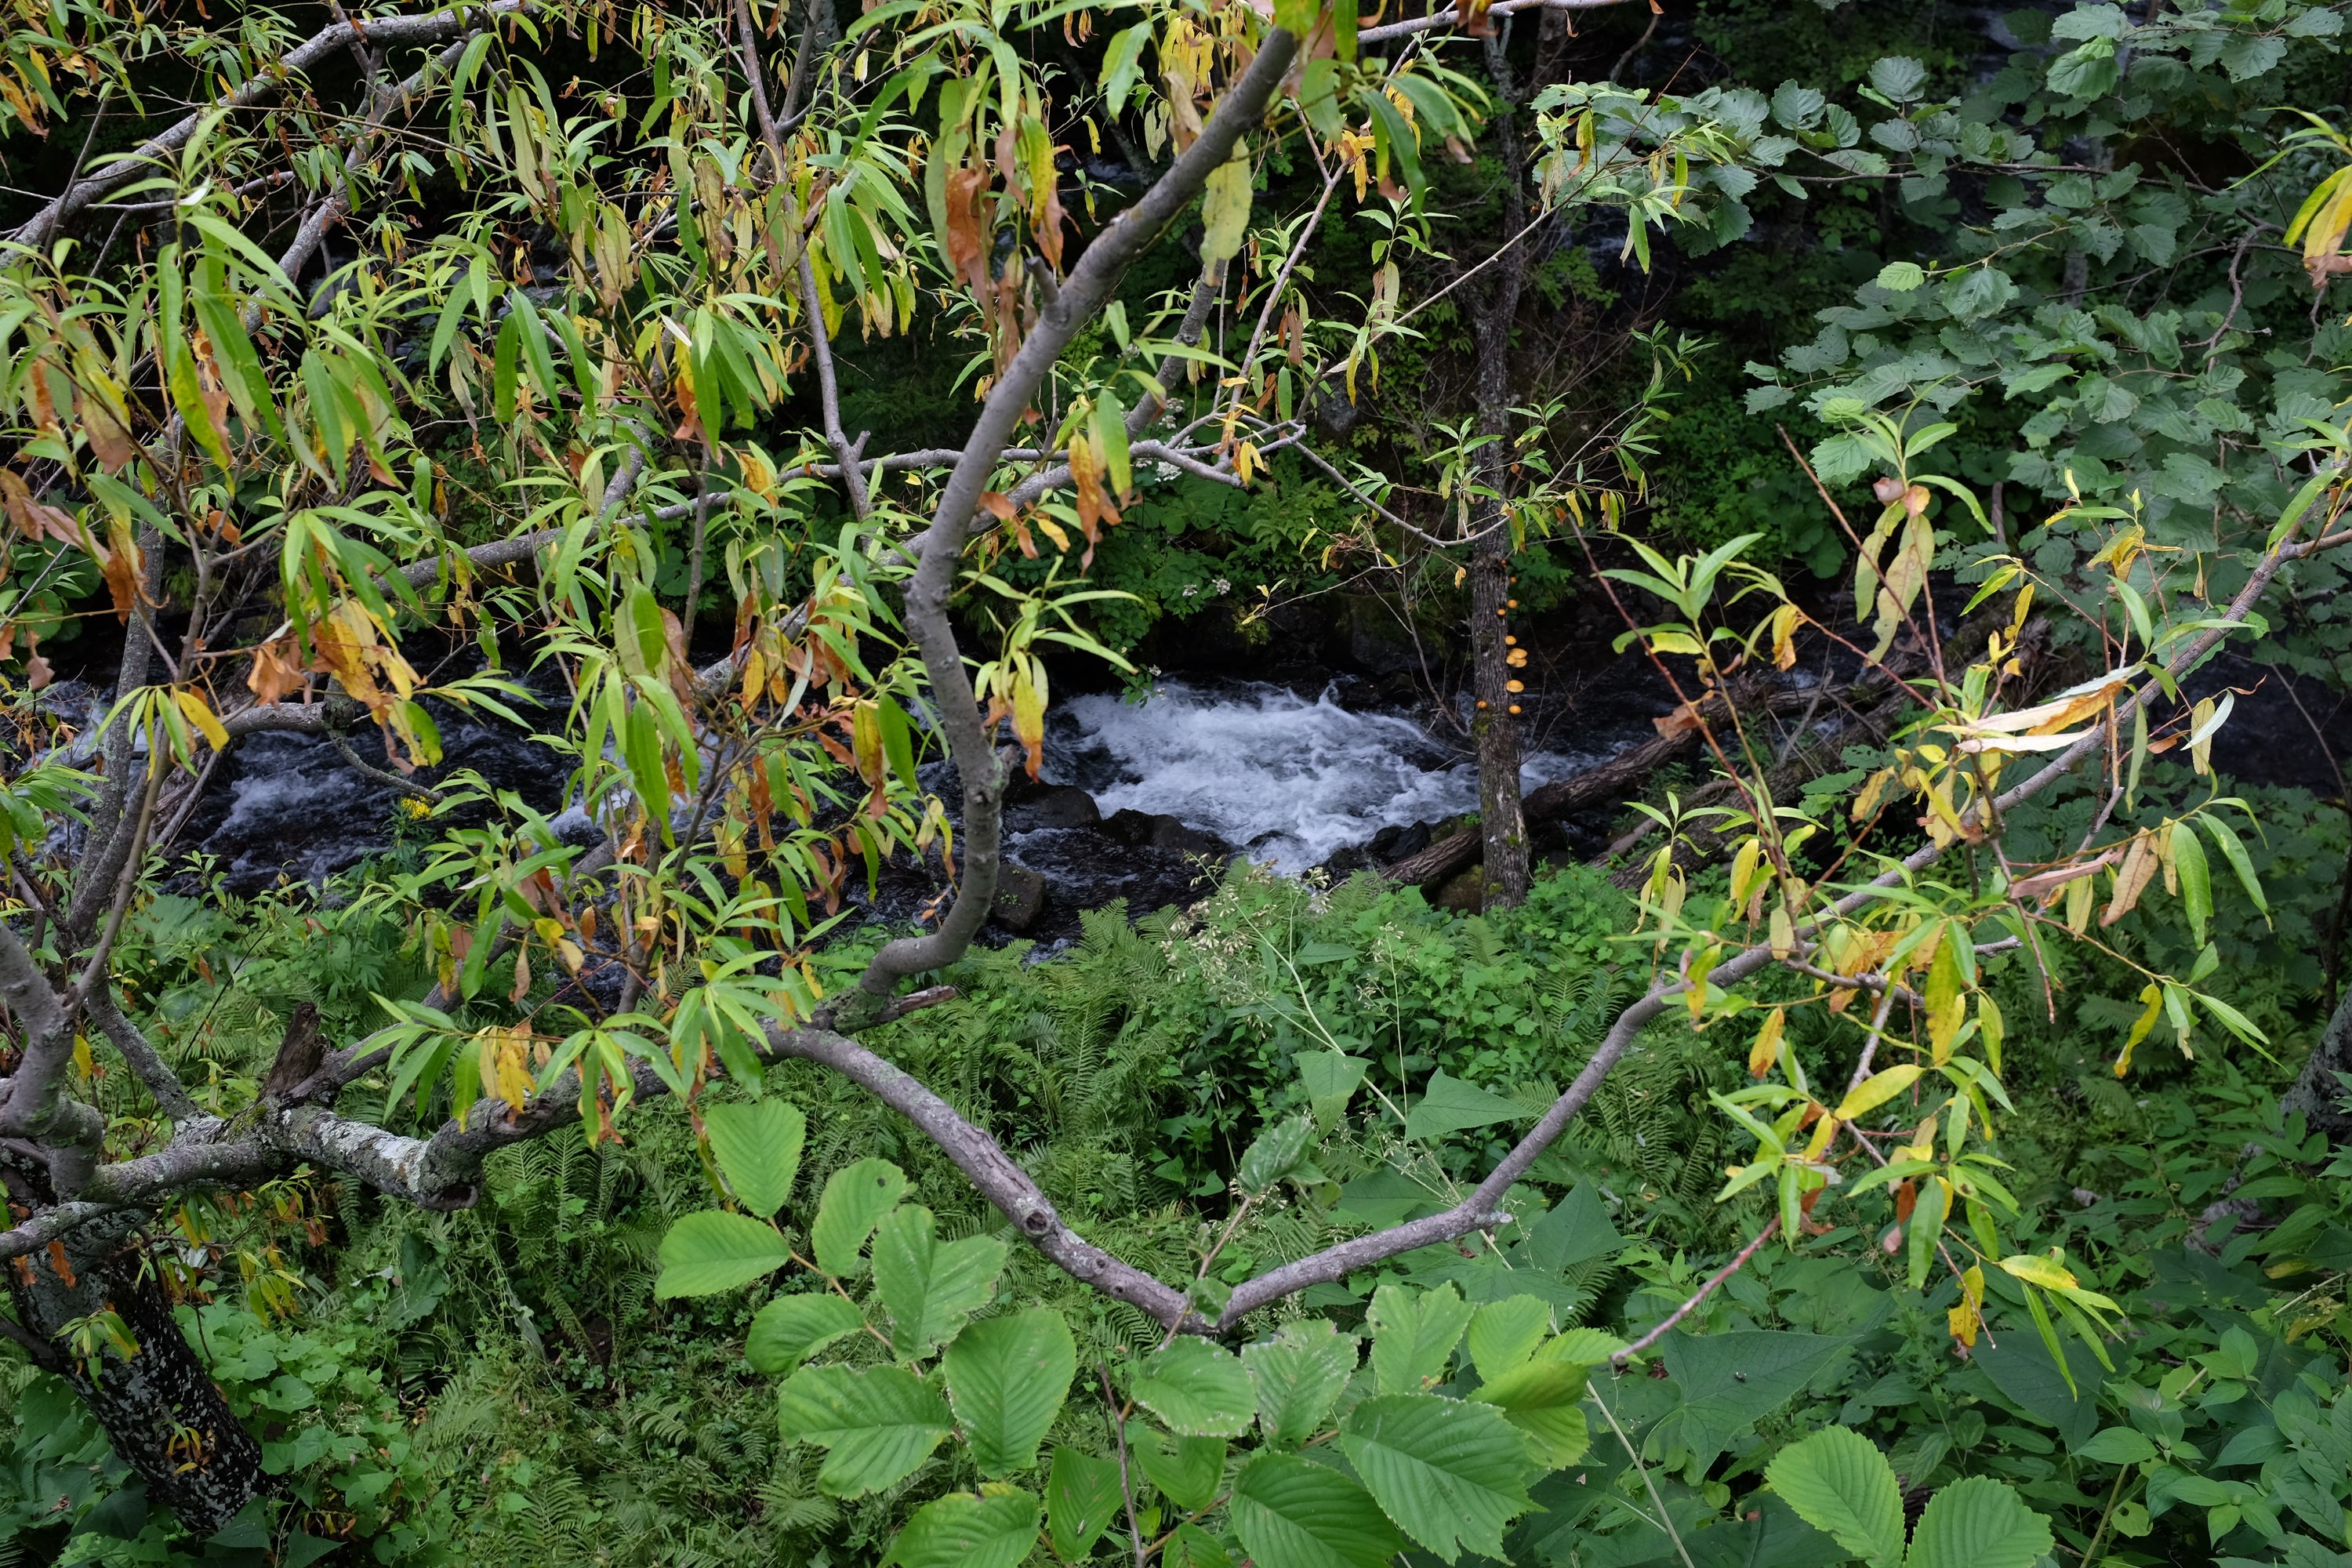 Another stream visible through the trees.